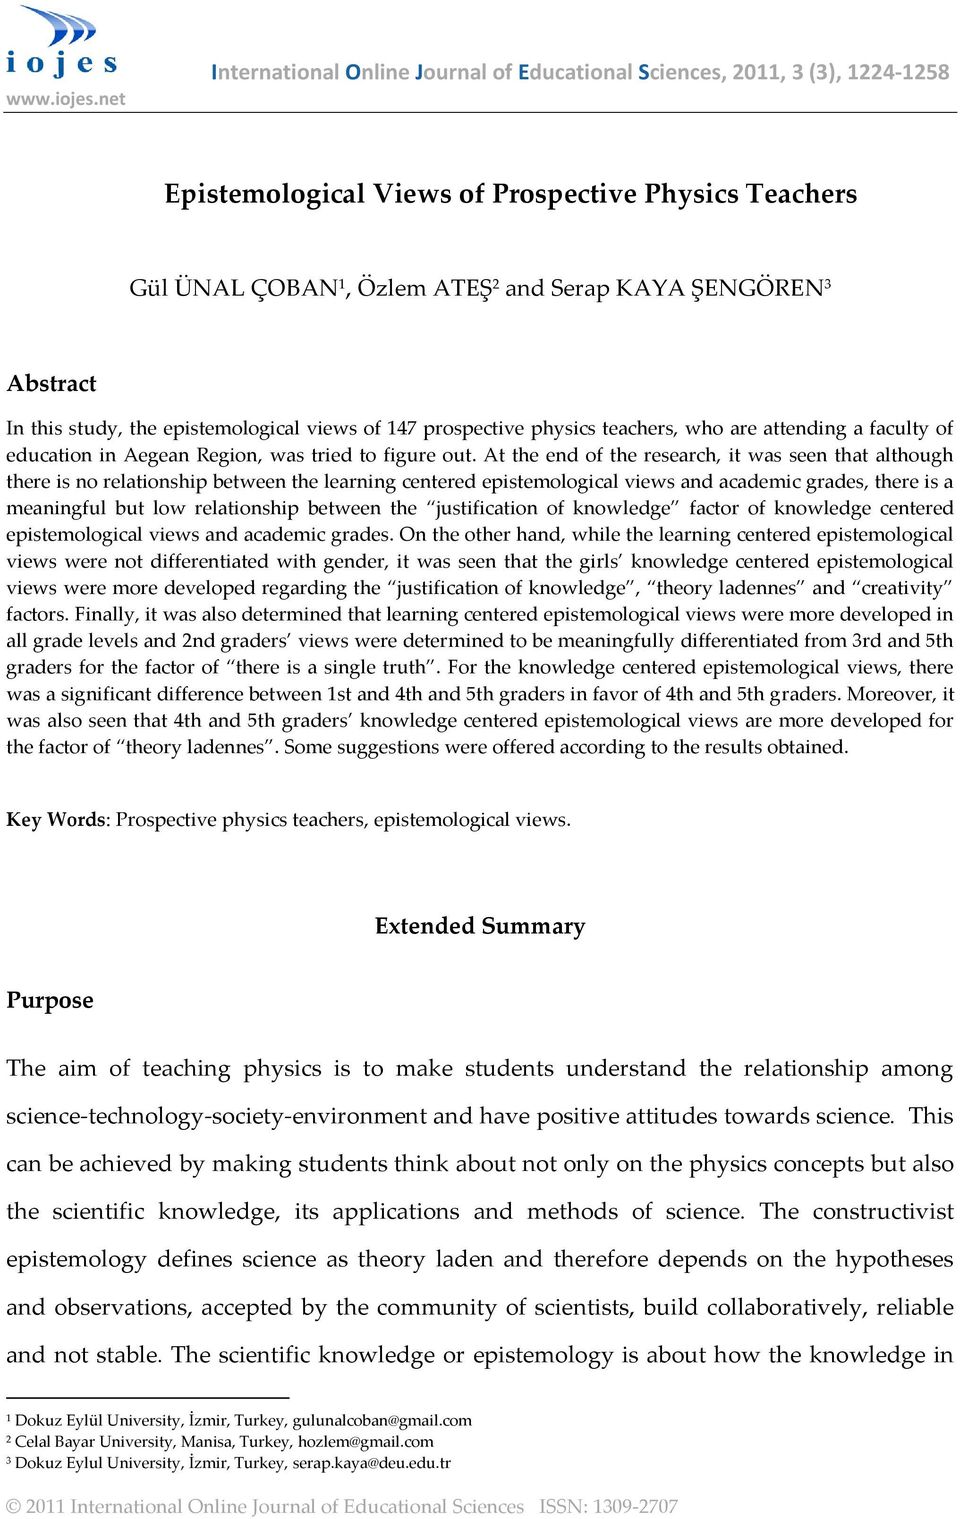 Abstract In this study, the epistemological views of 147 prospective physics teachers, who are attending a faculty of education in Aegean Region, was tried to figure out.